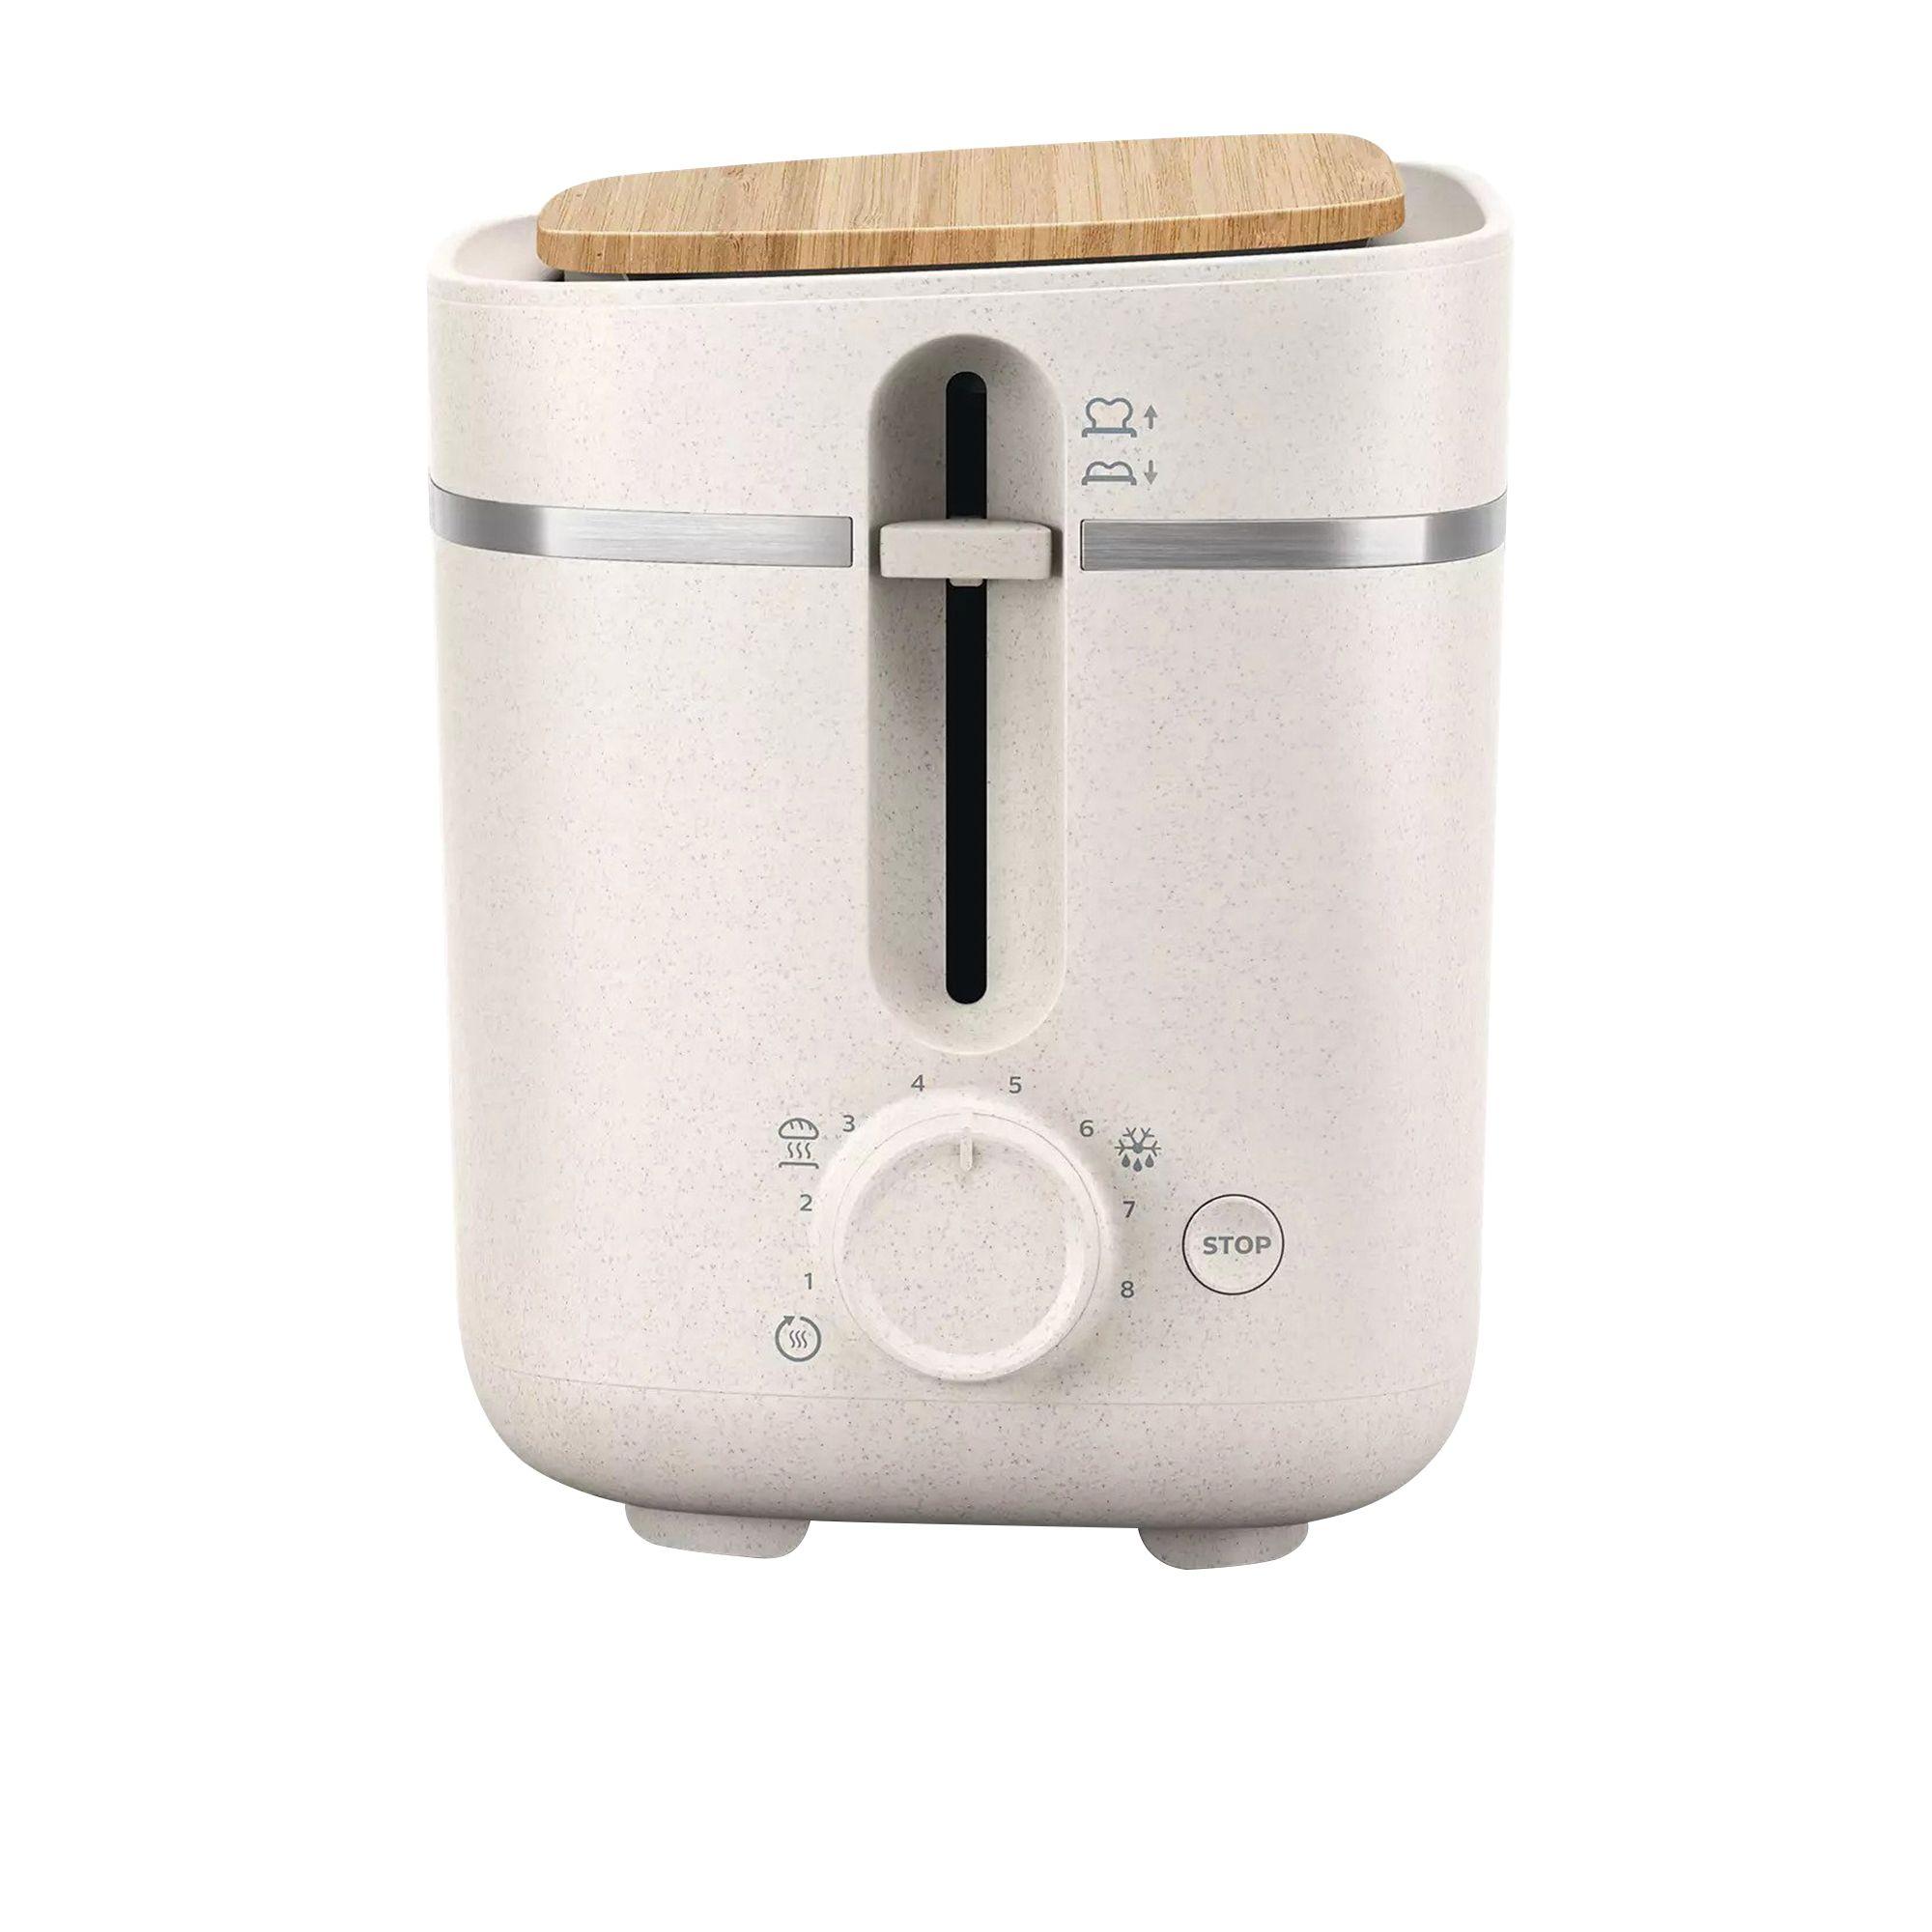 Philips Eco Collection 5000 Series 2 Slice Toaster Image 1